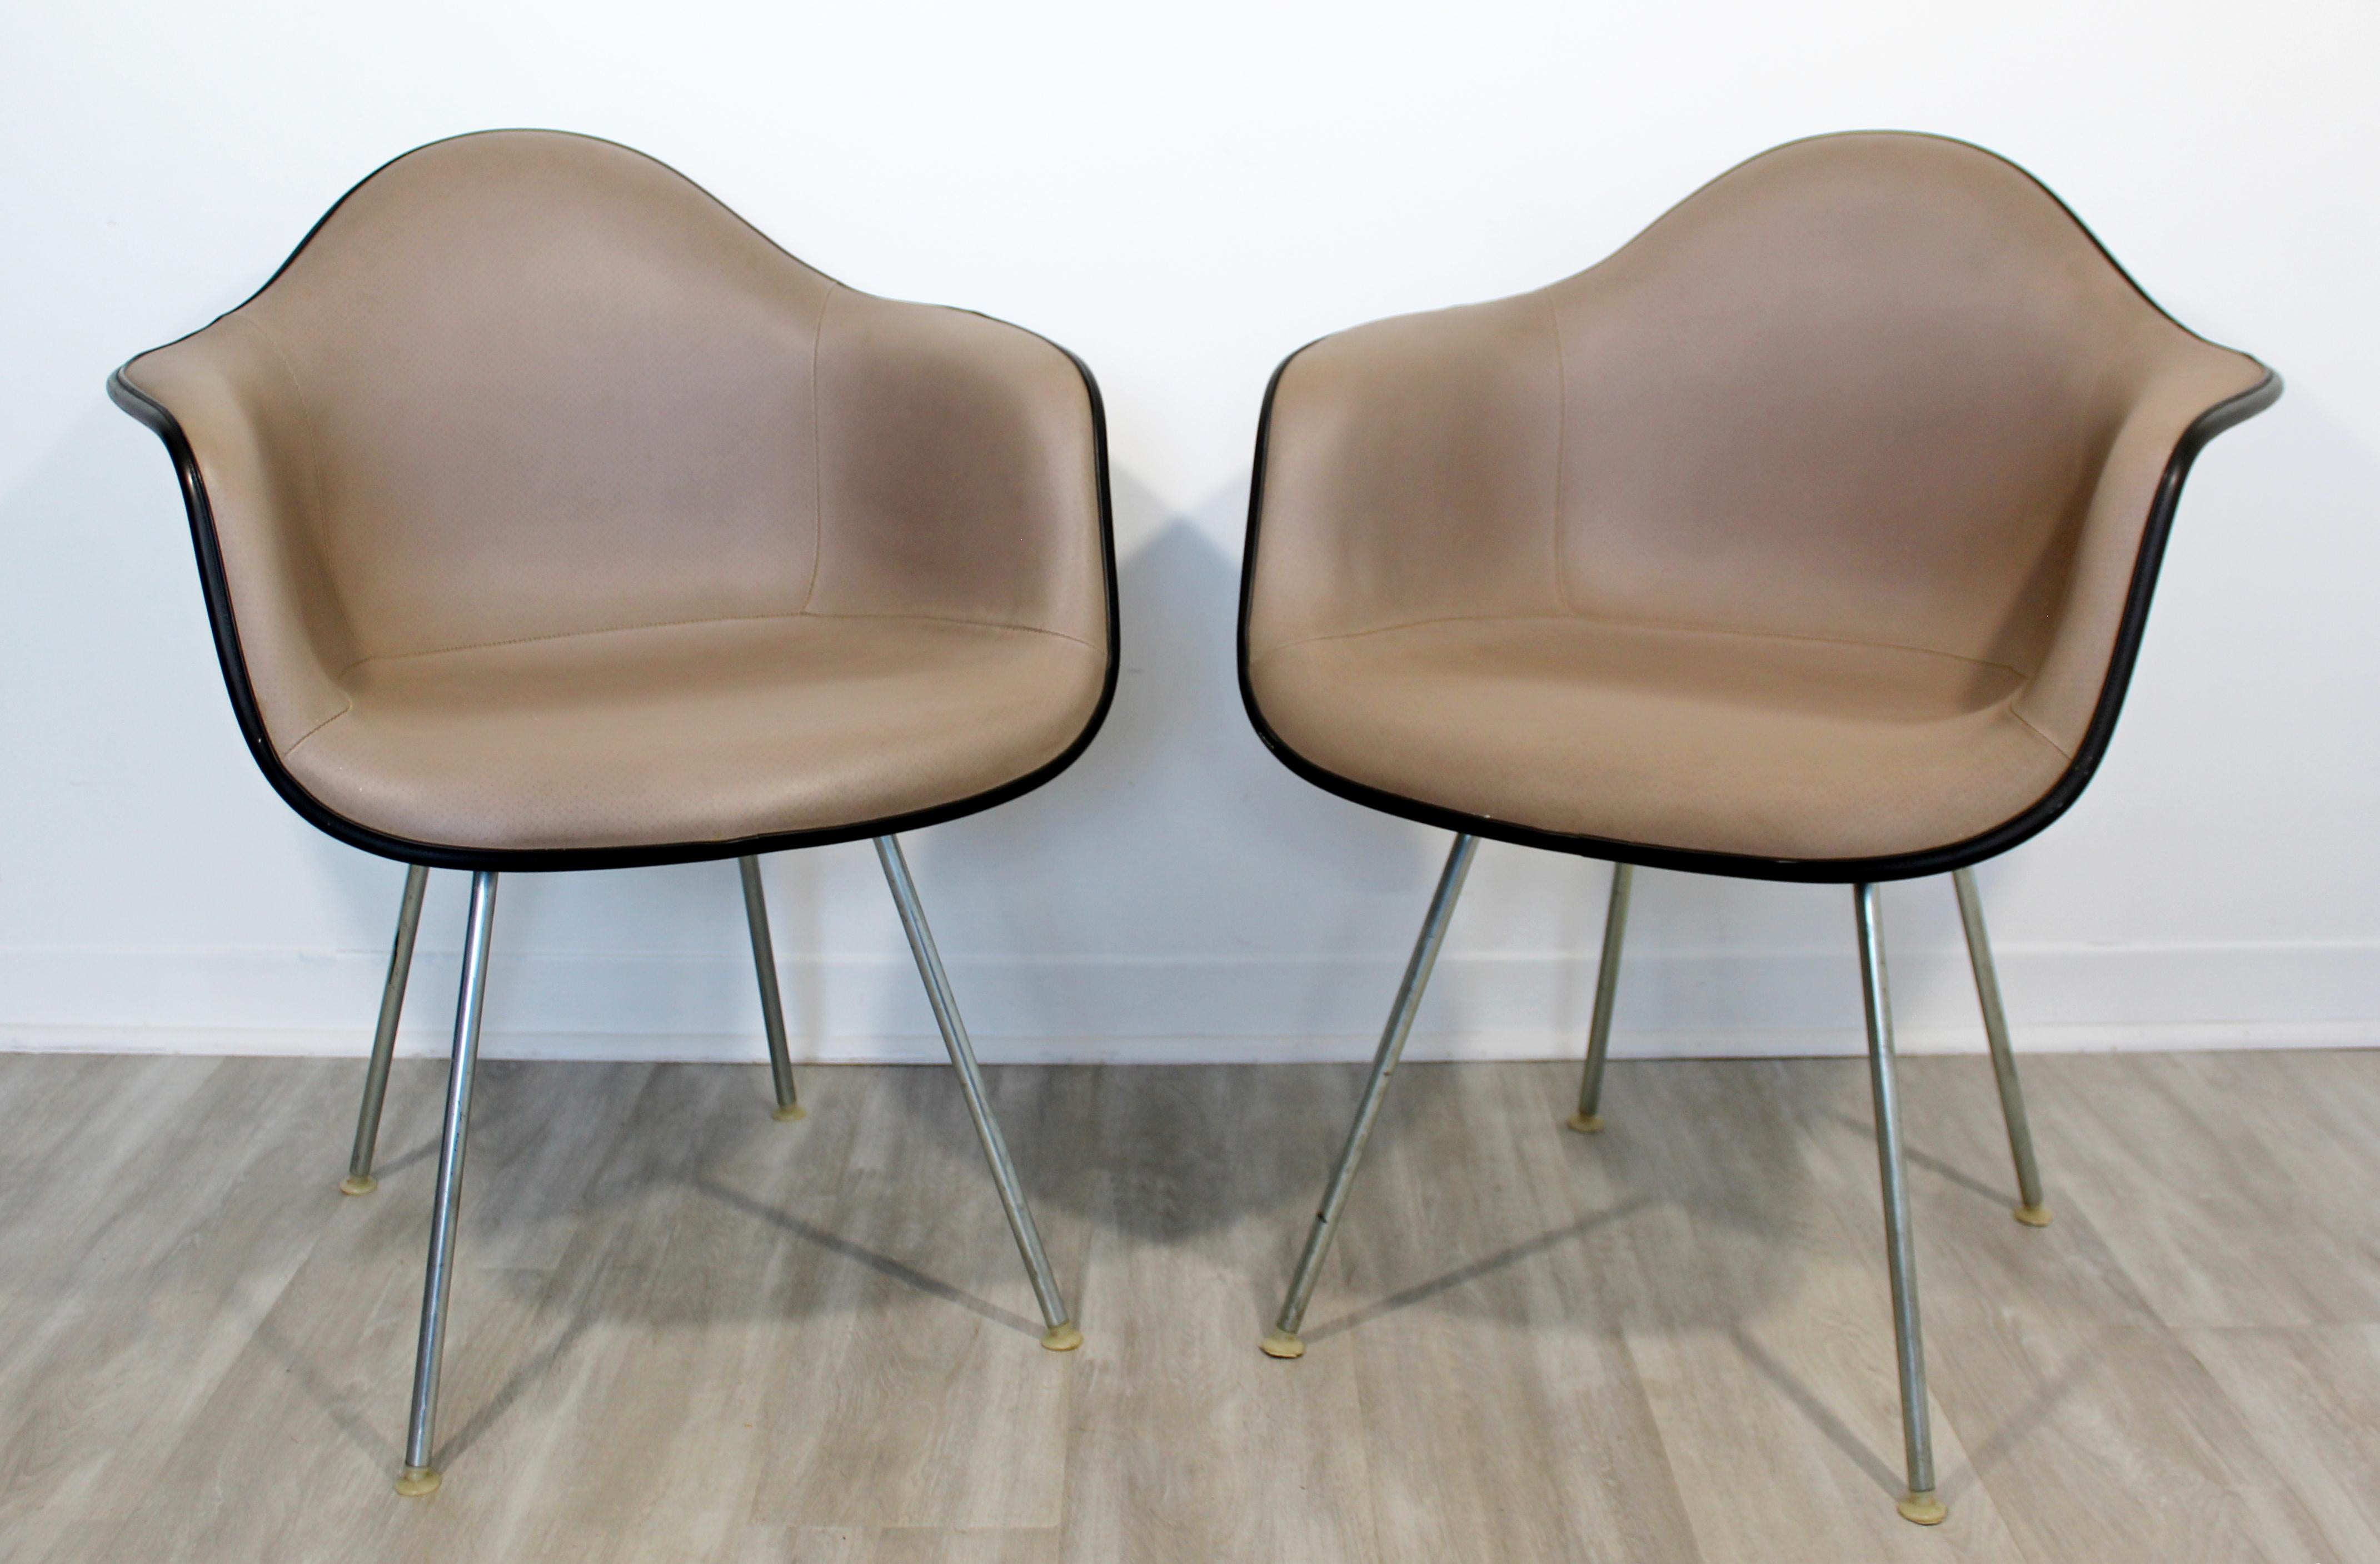 American Mid-Century Modern Charles Eames Herman Miller Pair Fabric Shell Armchairs 1960s